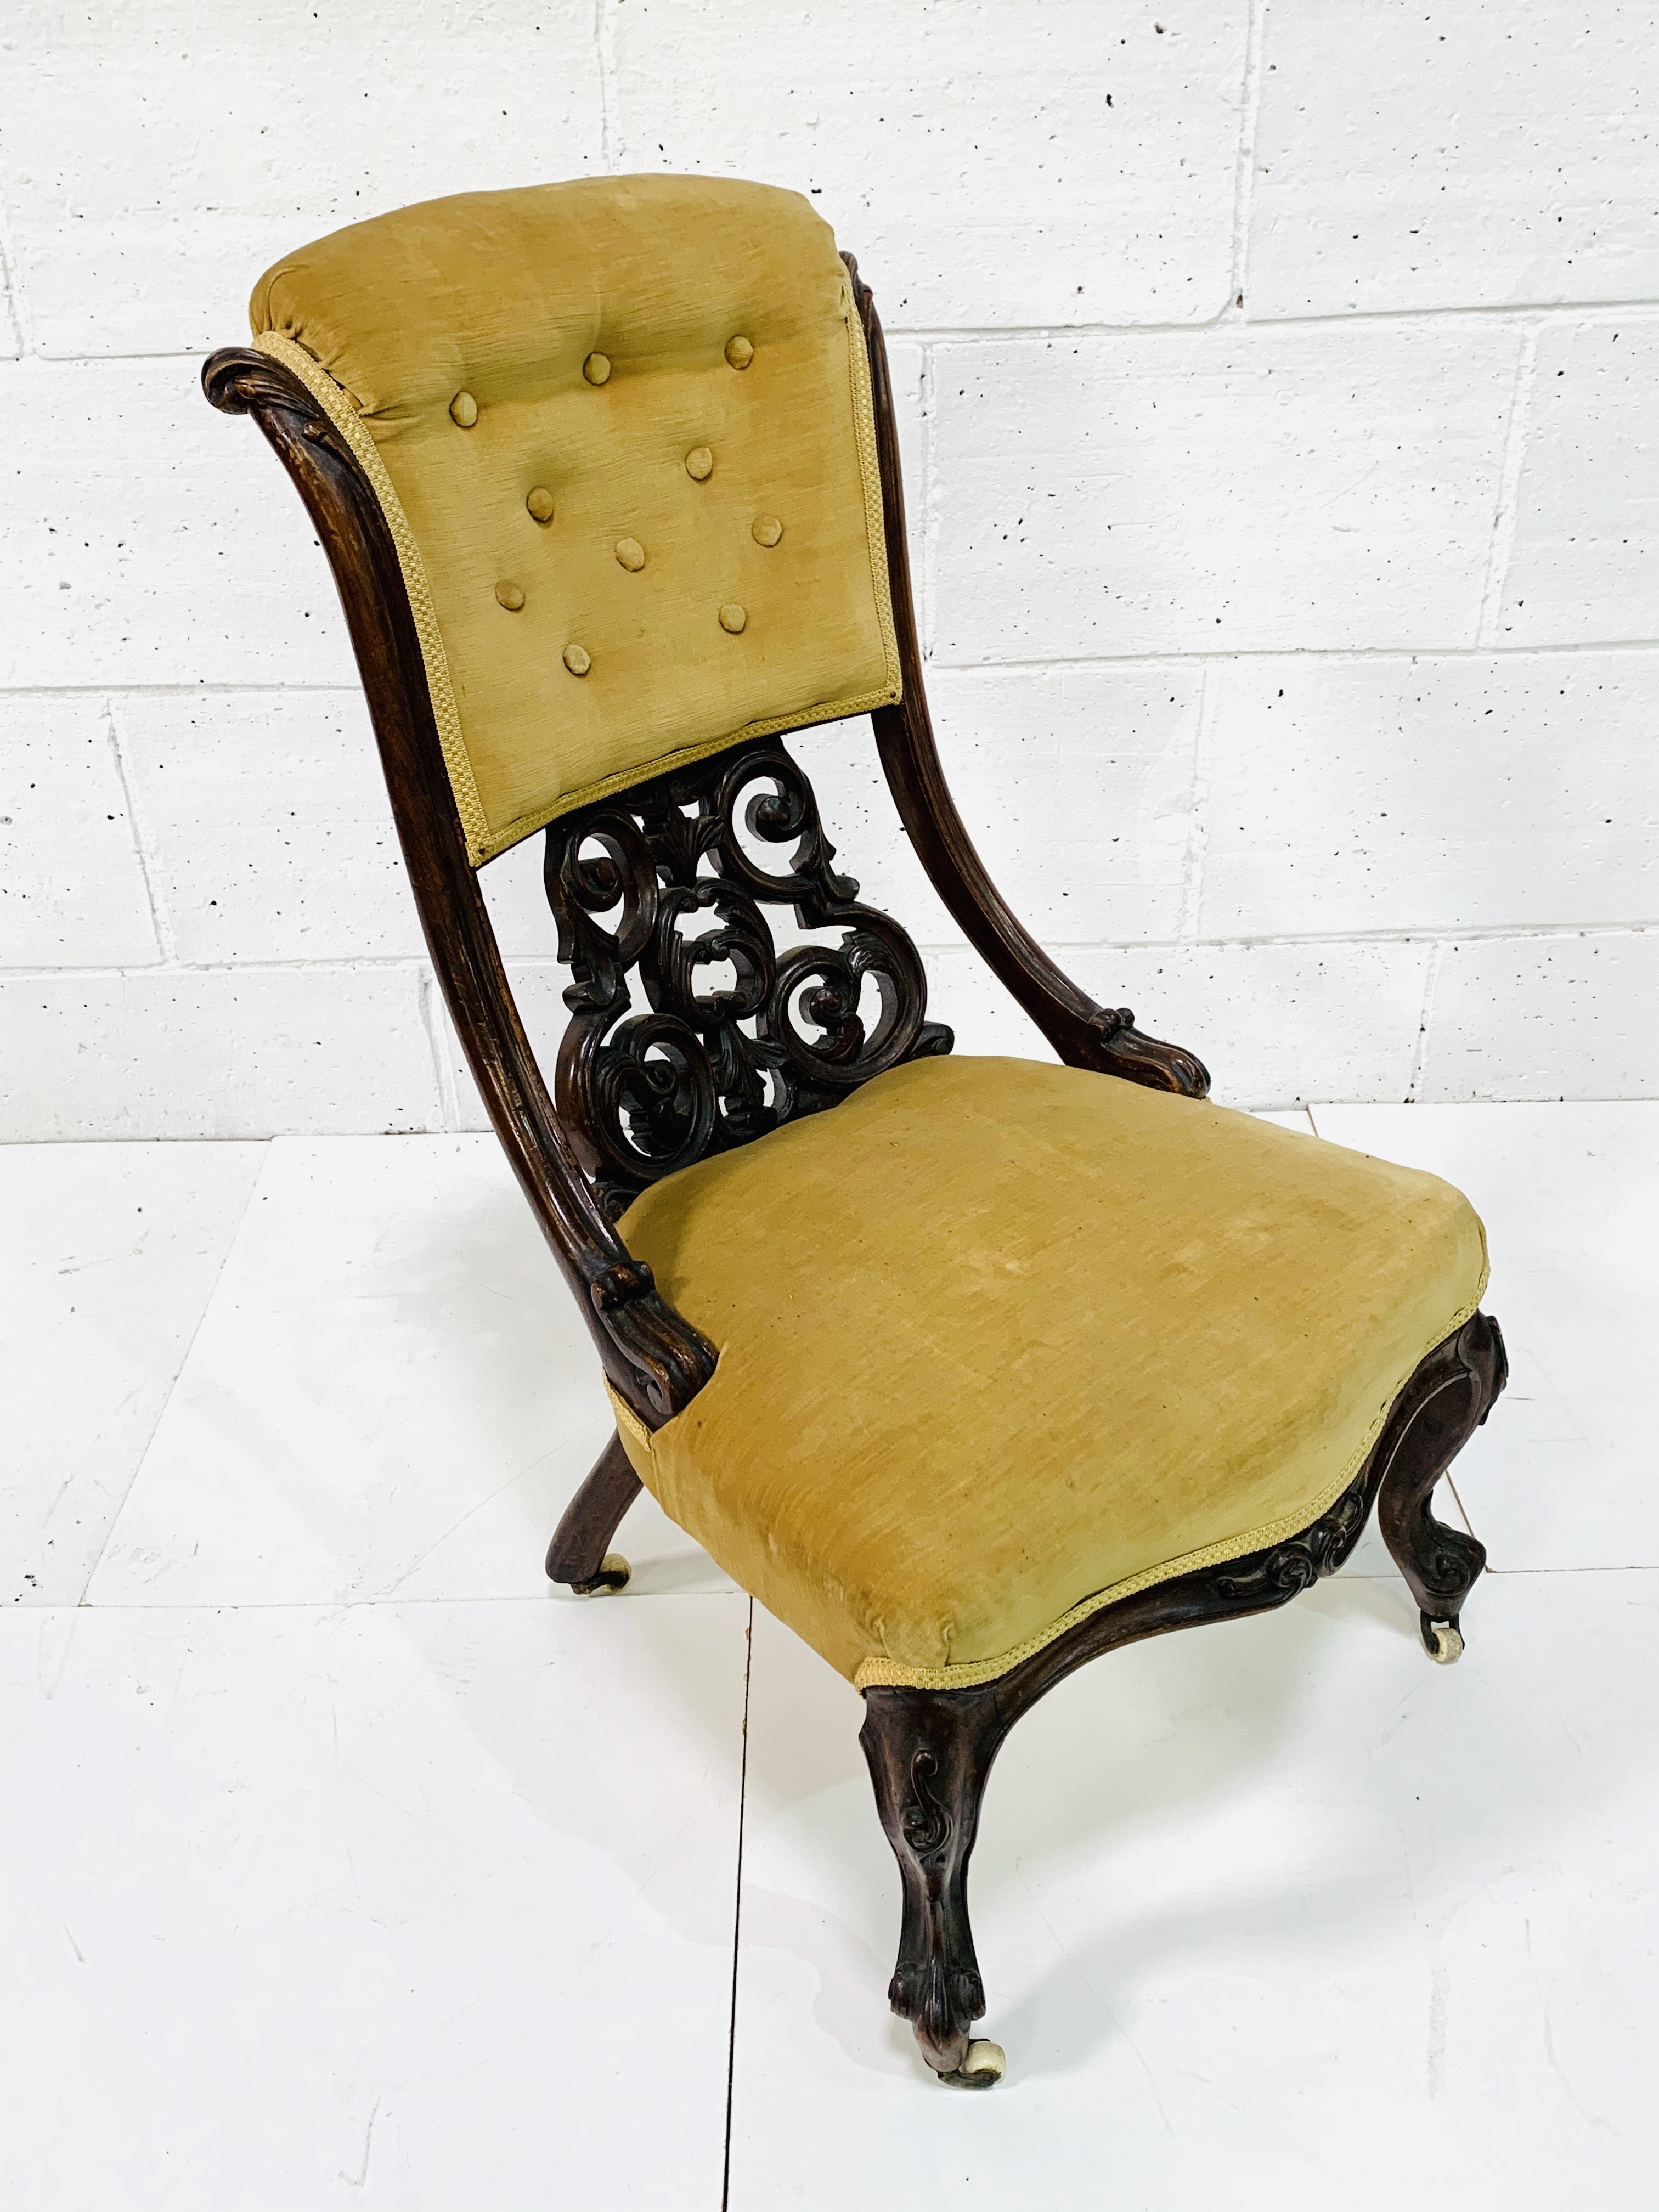 Ornately decorated mahogany framed drawing room chair with mustard yellow velvet upholstery.